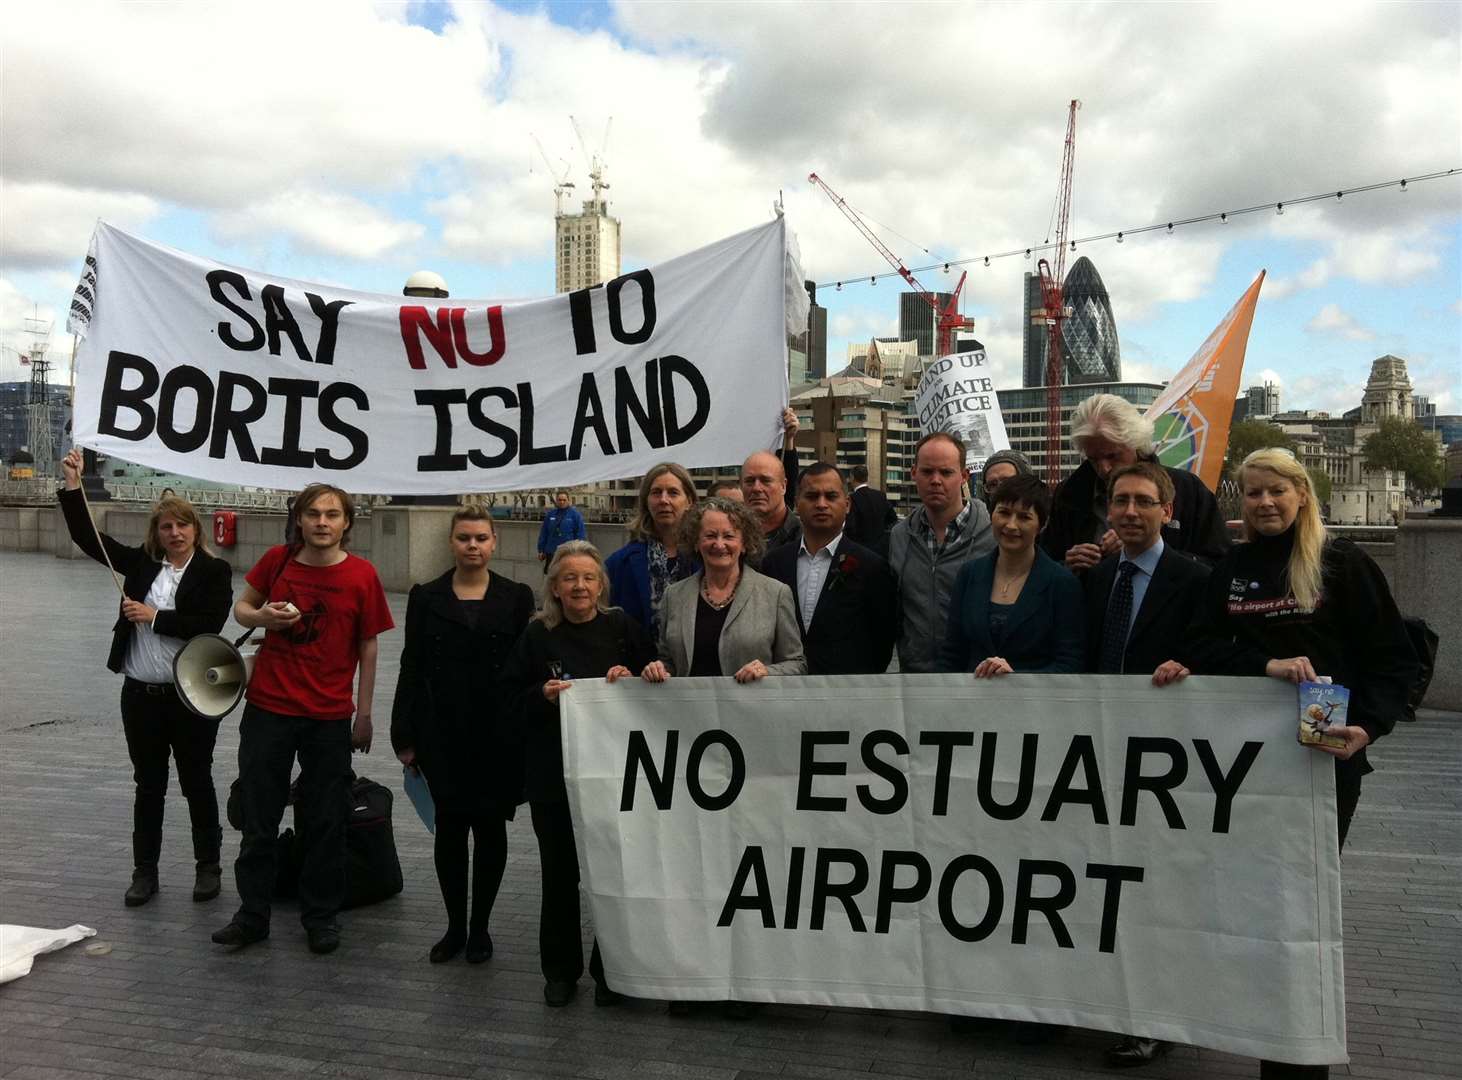 Opponents of a Thames Estuary airport protesting outside City Hall in London when Mr Johnson was London mayor